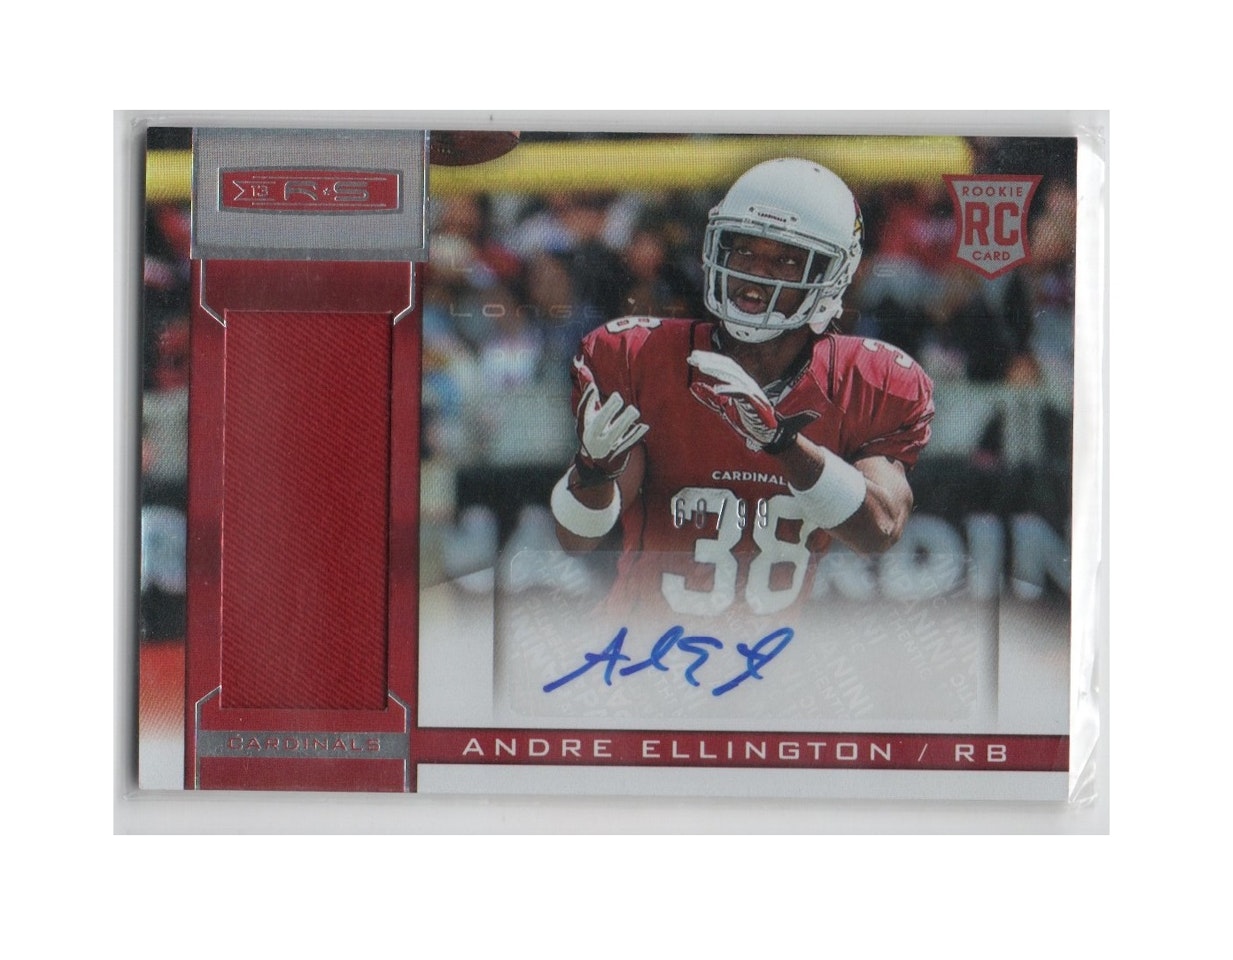 2013 Rookies and Stars Longevity Rookie Jersey Autographs Ruby #202 Andre Ellington (40-X249-NFLCARDINALS)